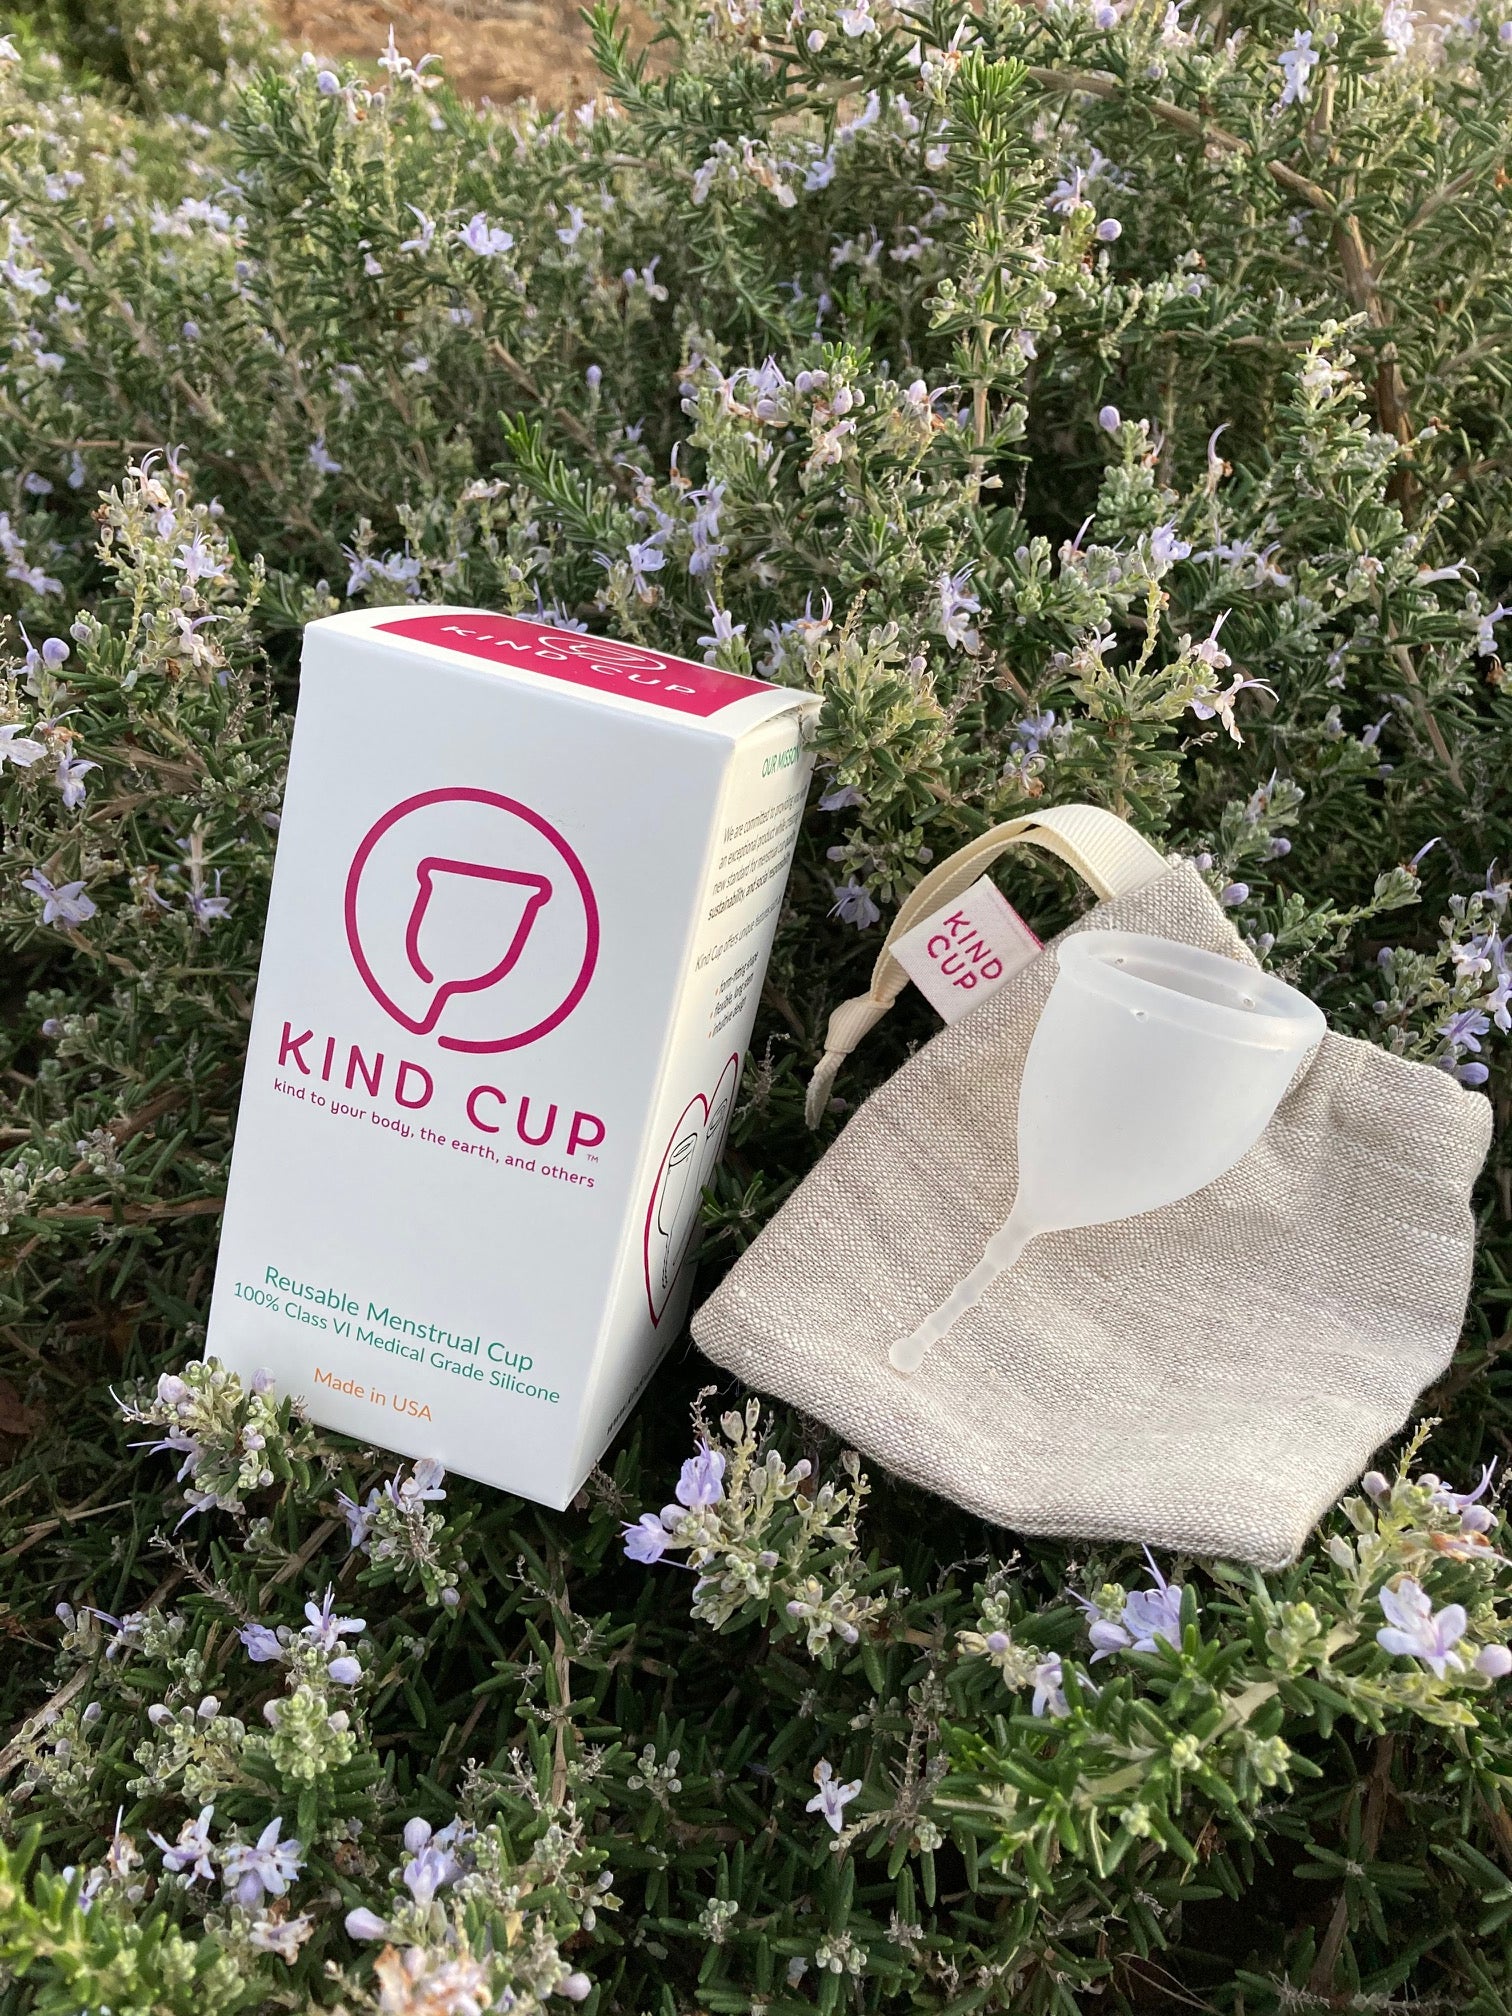 Kind Cup size small menstrual cup placed on earth-friendly linen bag and sustainable packaging all on a blooming rosemary bush